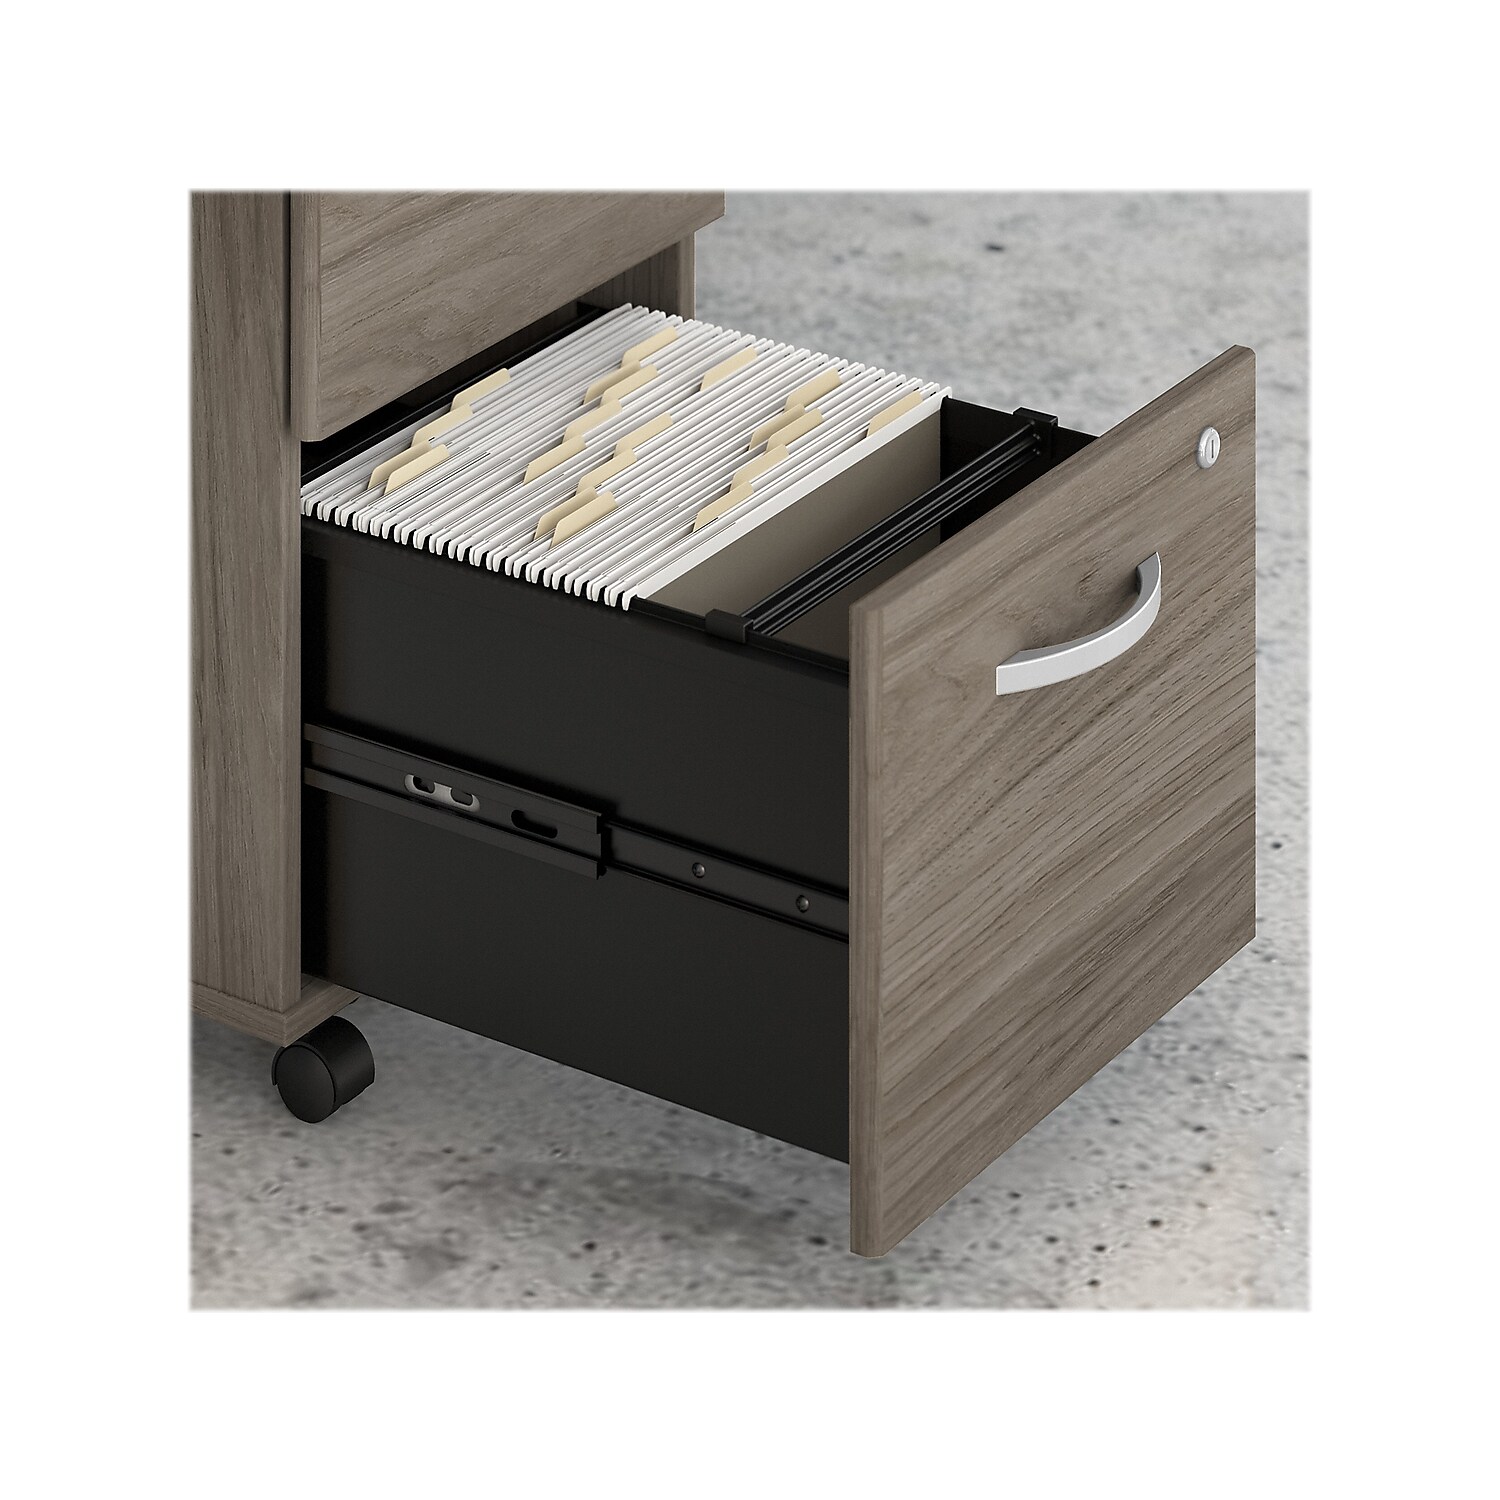 Hybrid 2 Drawer Mobile File Cabinet in Modern Hickory - Engineered Wood - image 5 of 6